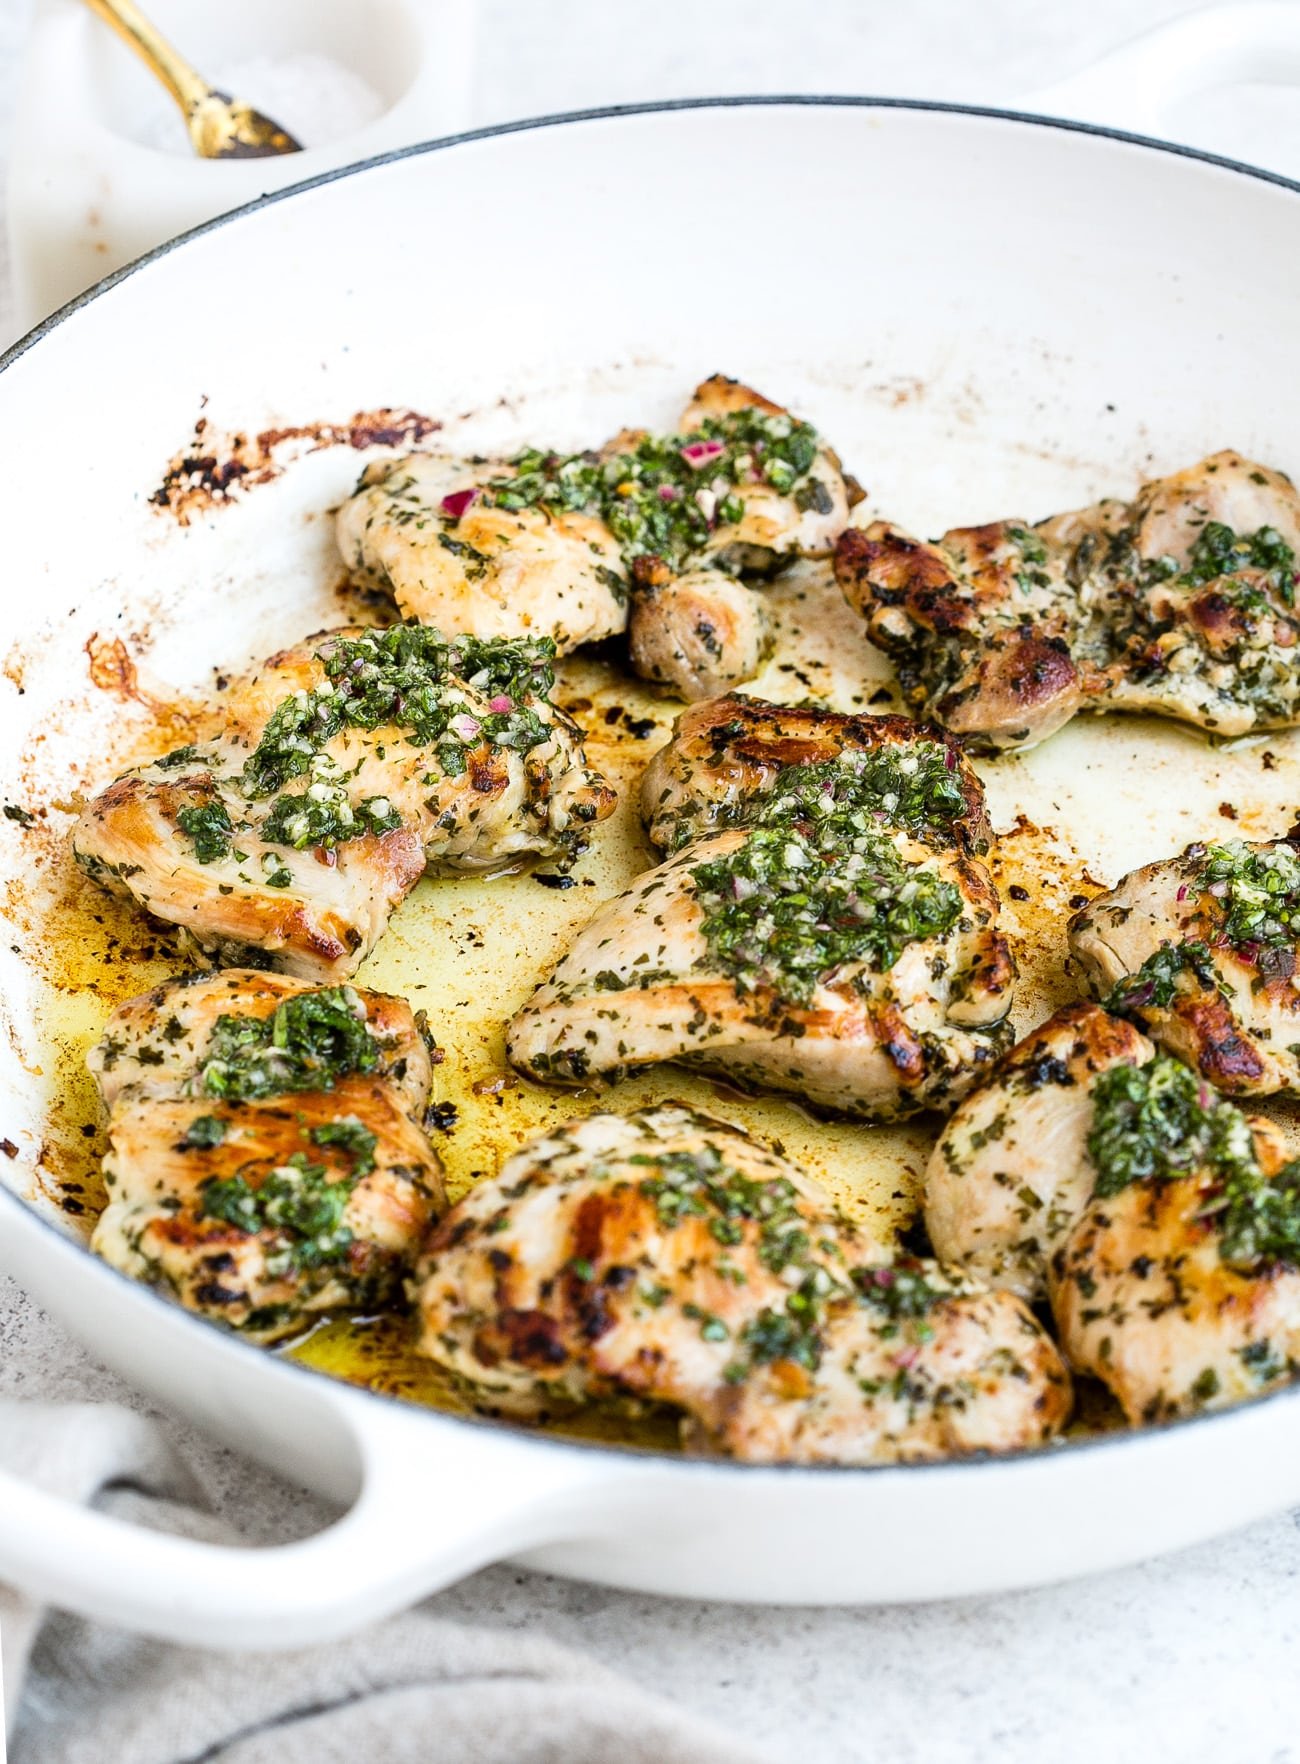 Chimichurri chicken in a large, white skillet.